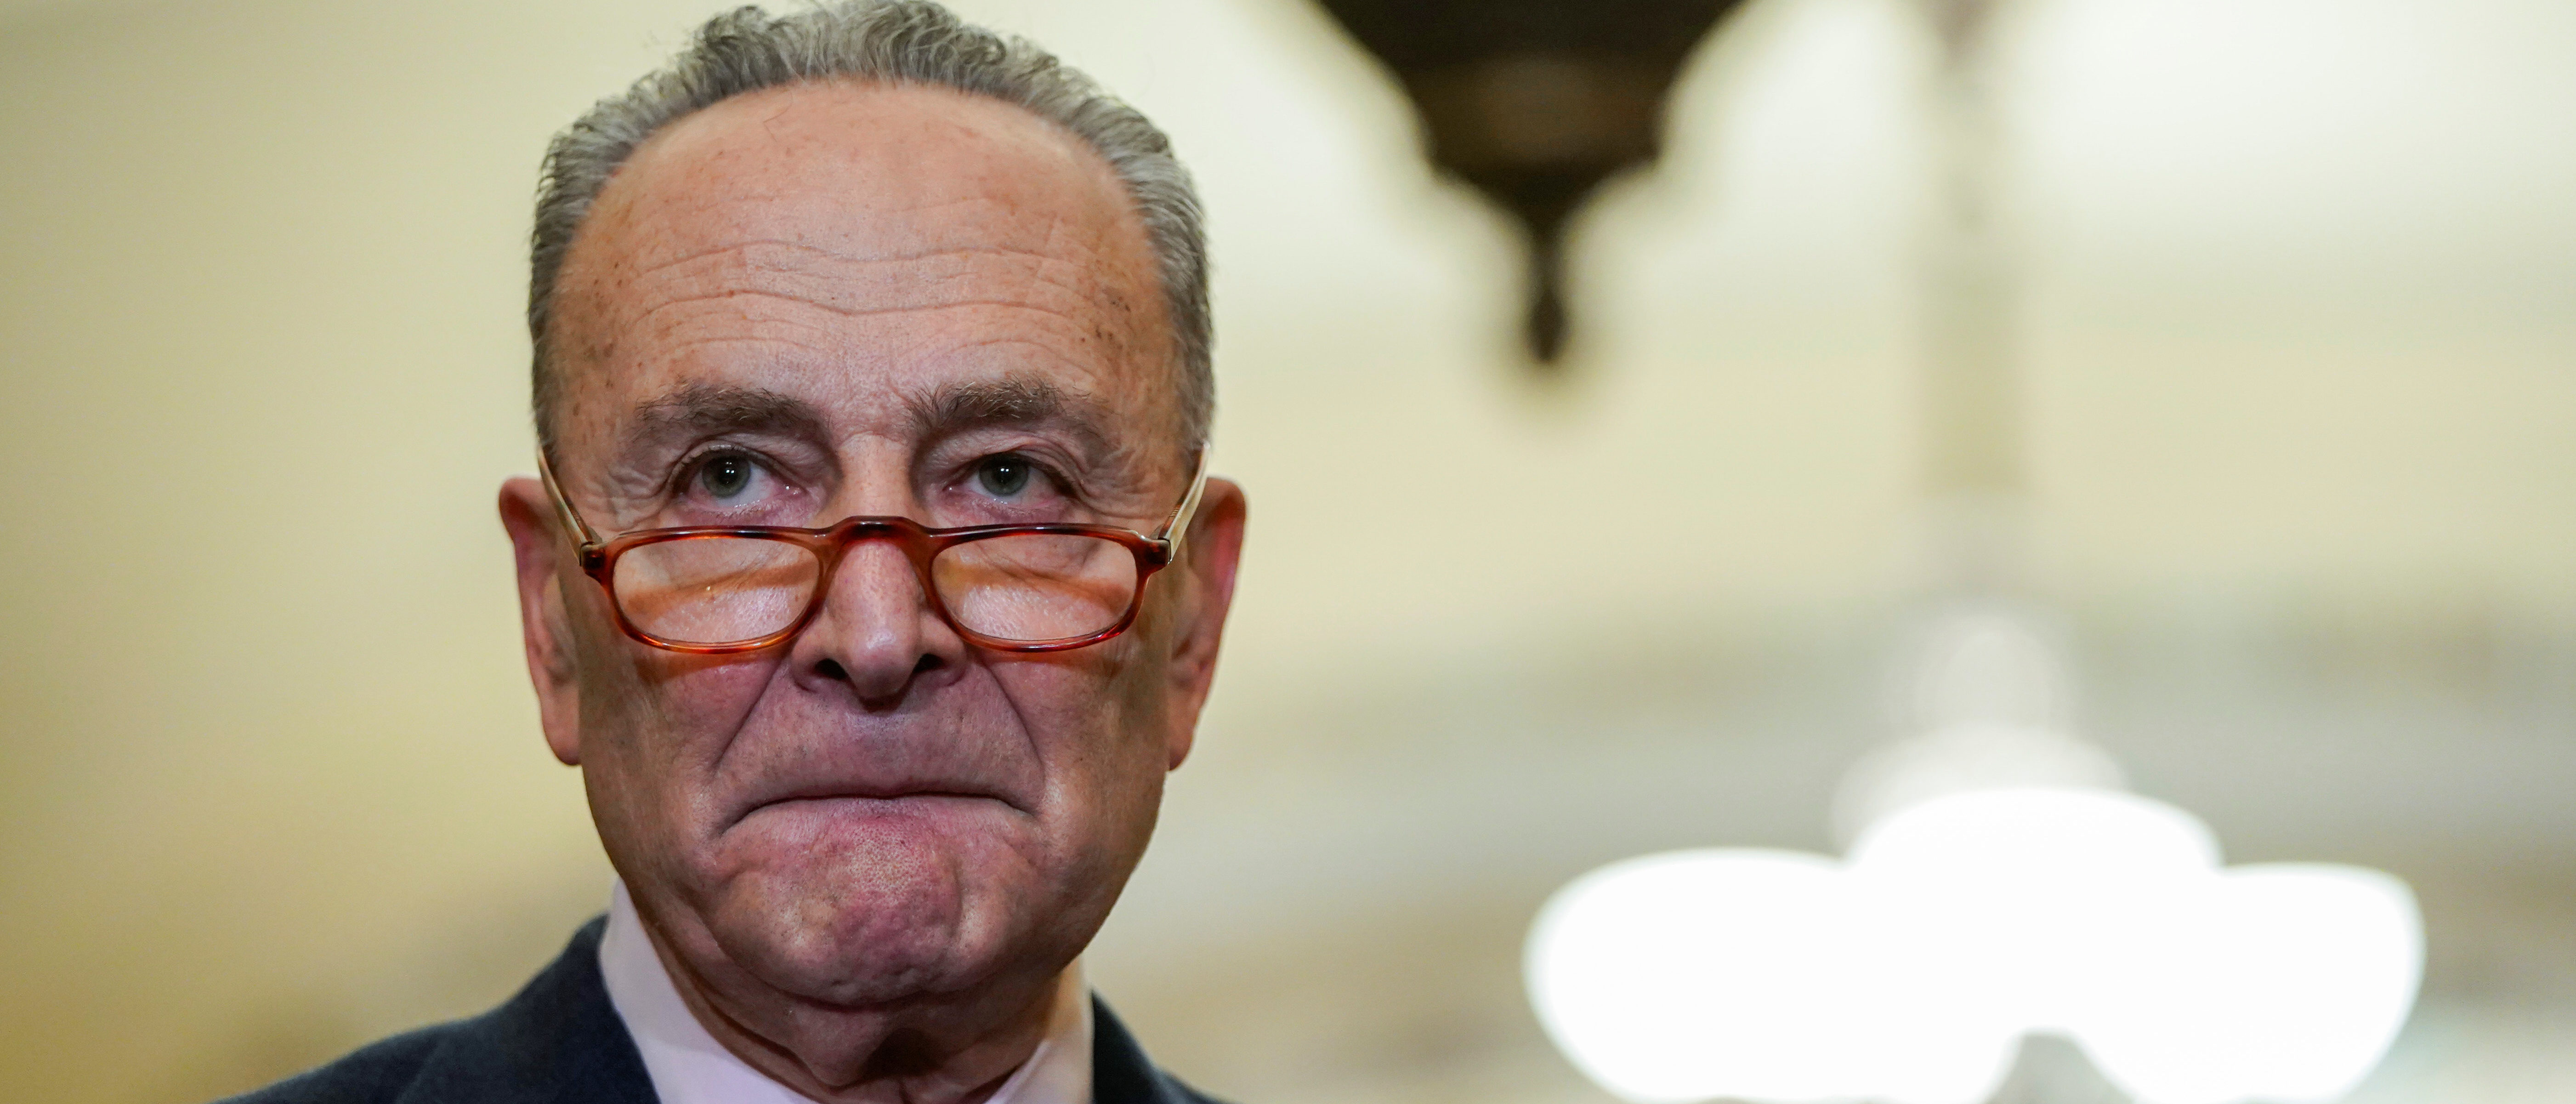 Senate Minority Leader Chuck Schumer (D-NY) speaks after a Democratic policy lunch on Capitol Hill in Washington, U.S., January 29, 2019. REUTERS/Joshua Roberts.